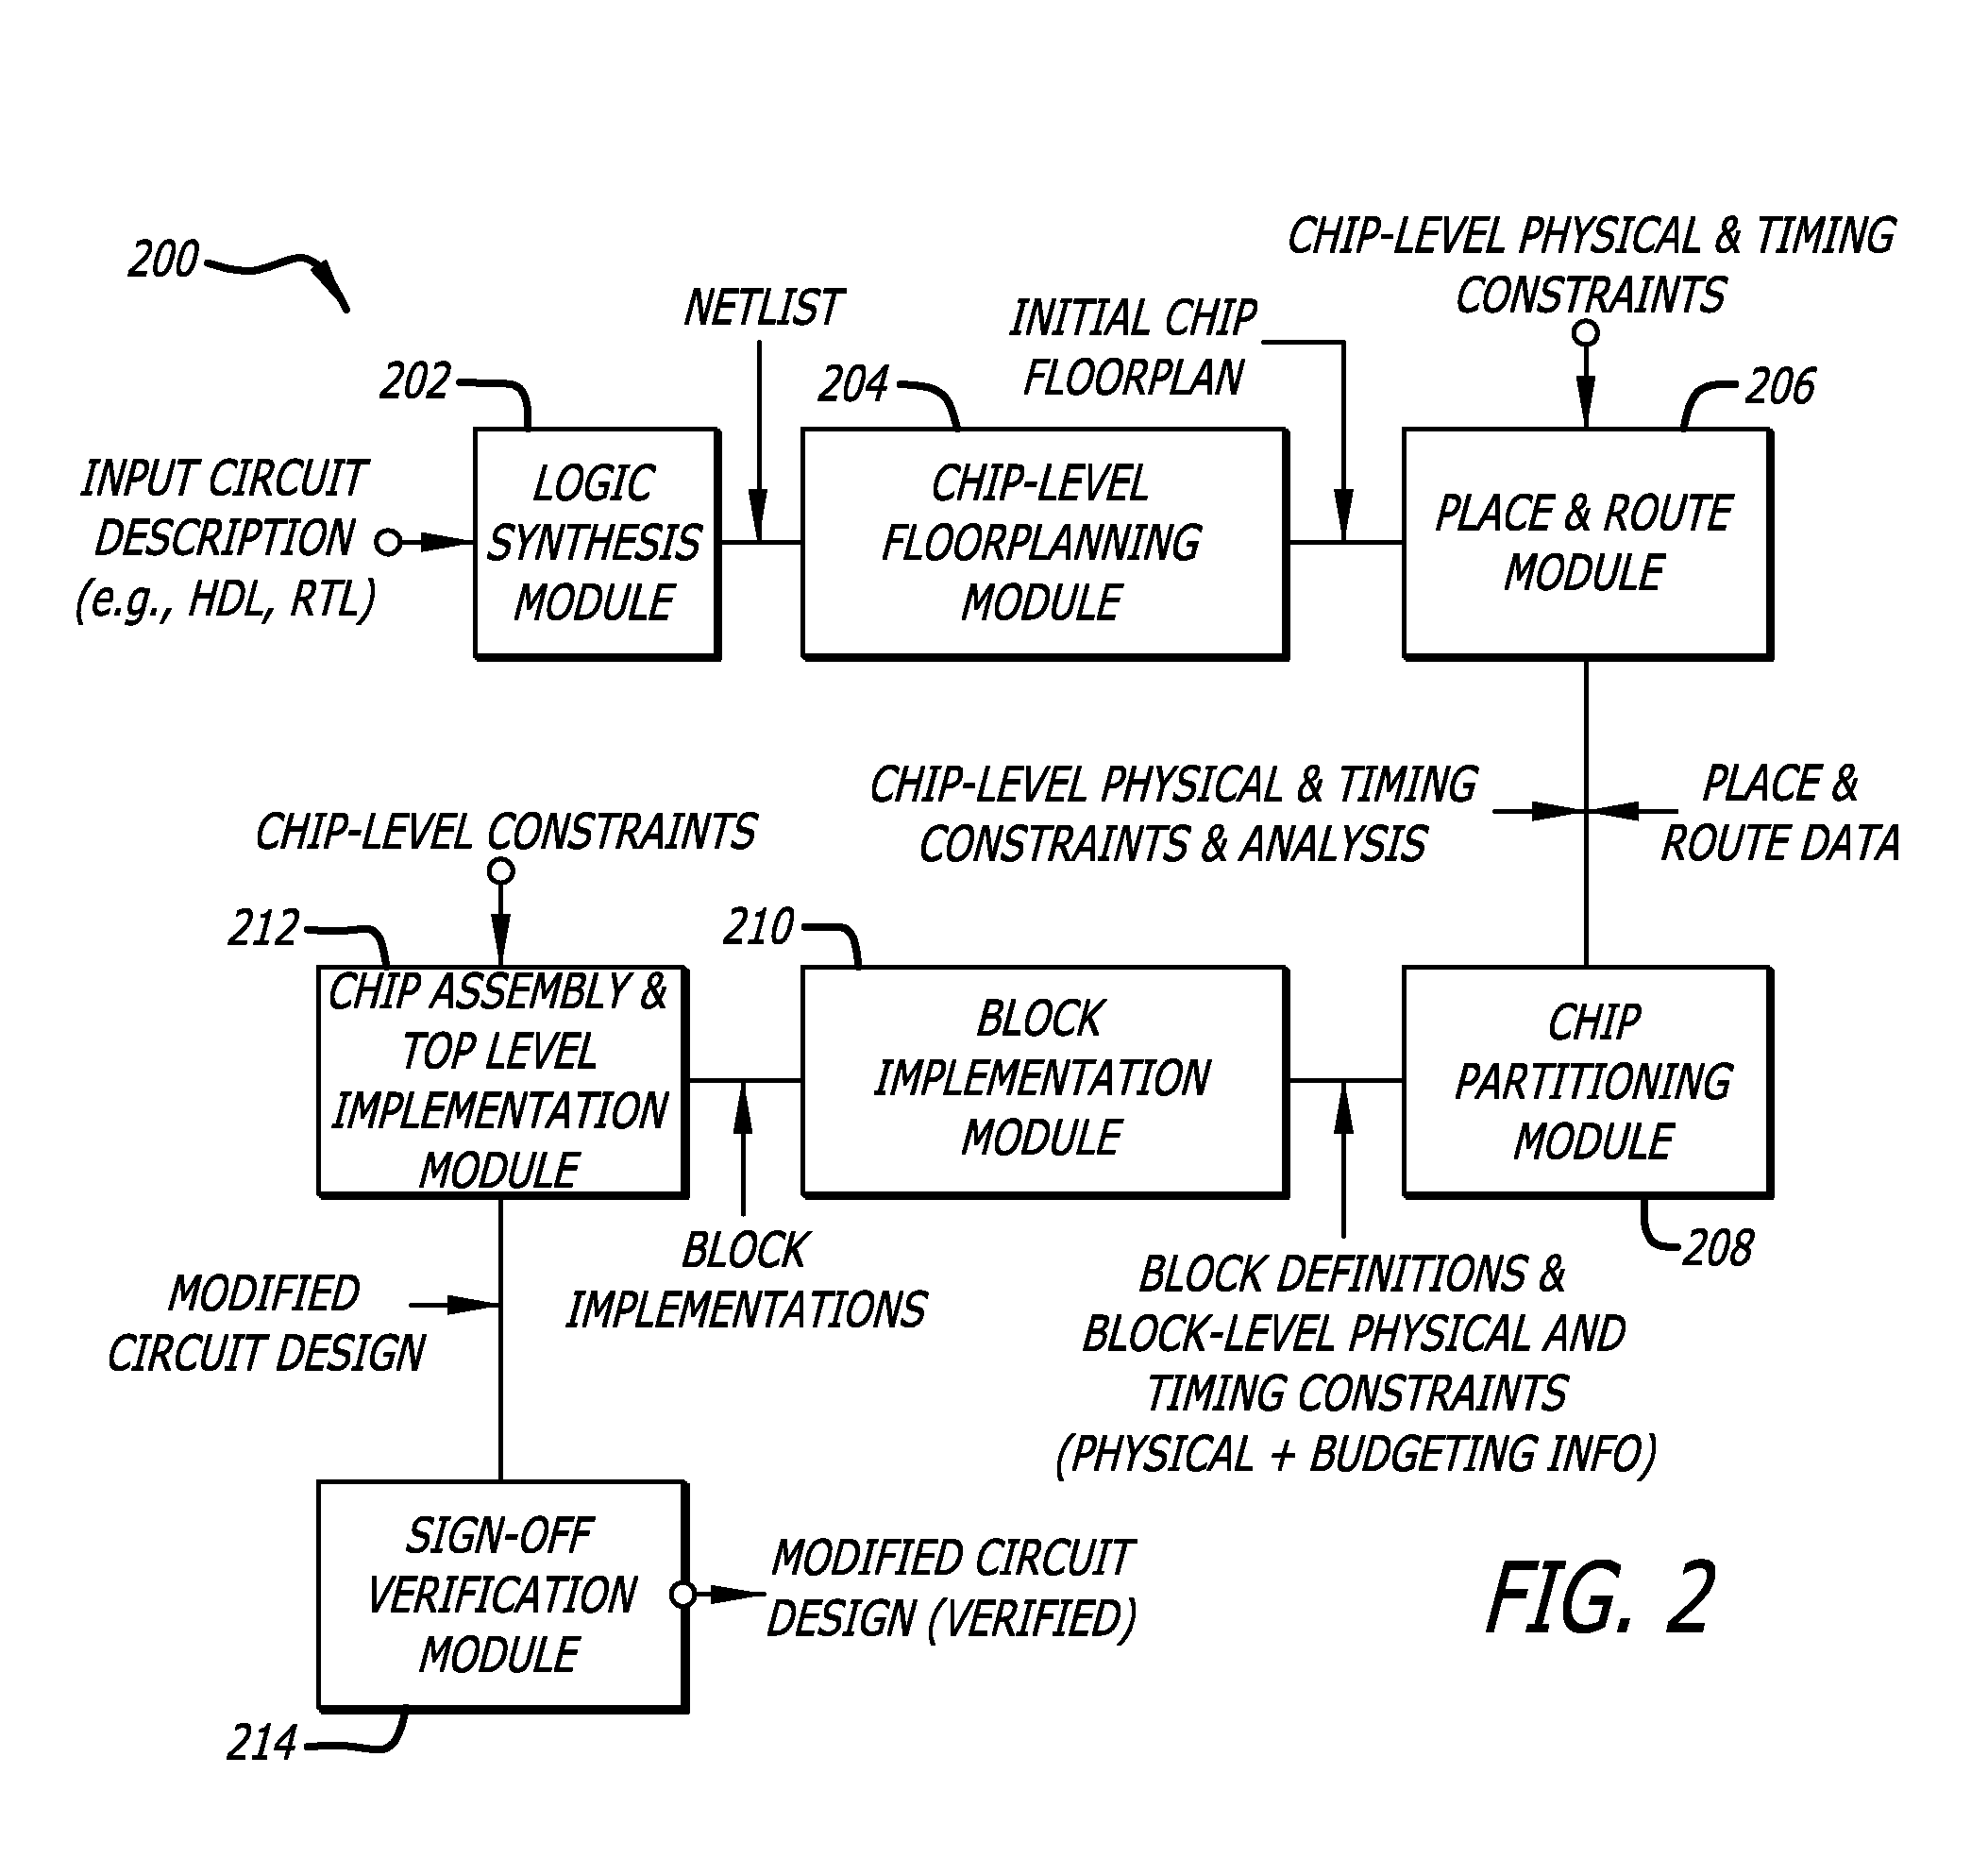 System and method of generating hierarchical block-level timing constraints from chip-level timing constraints